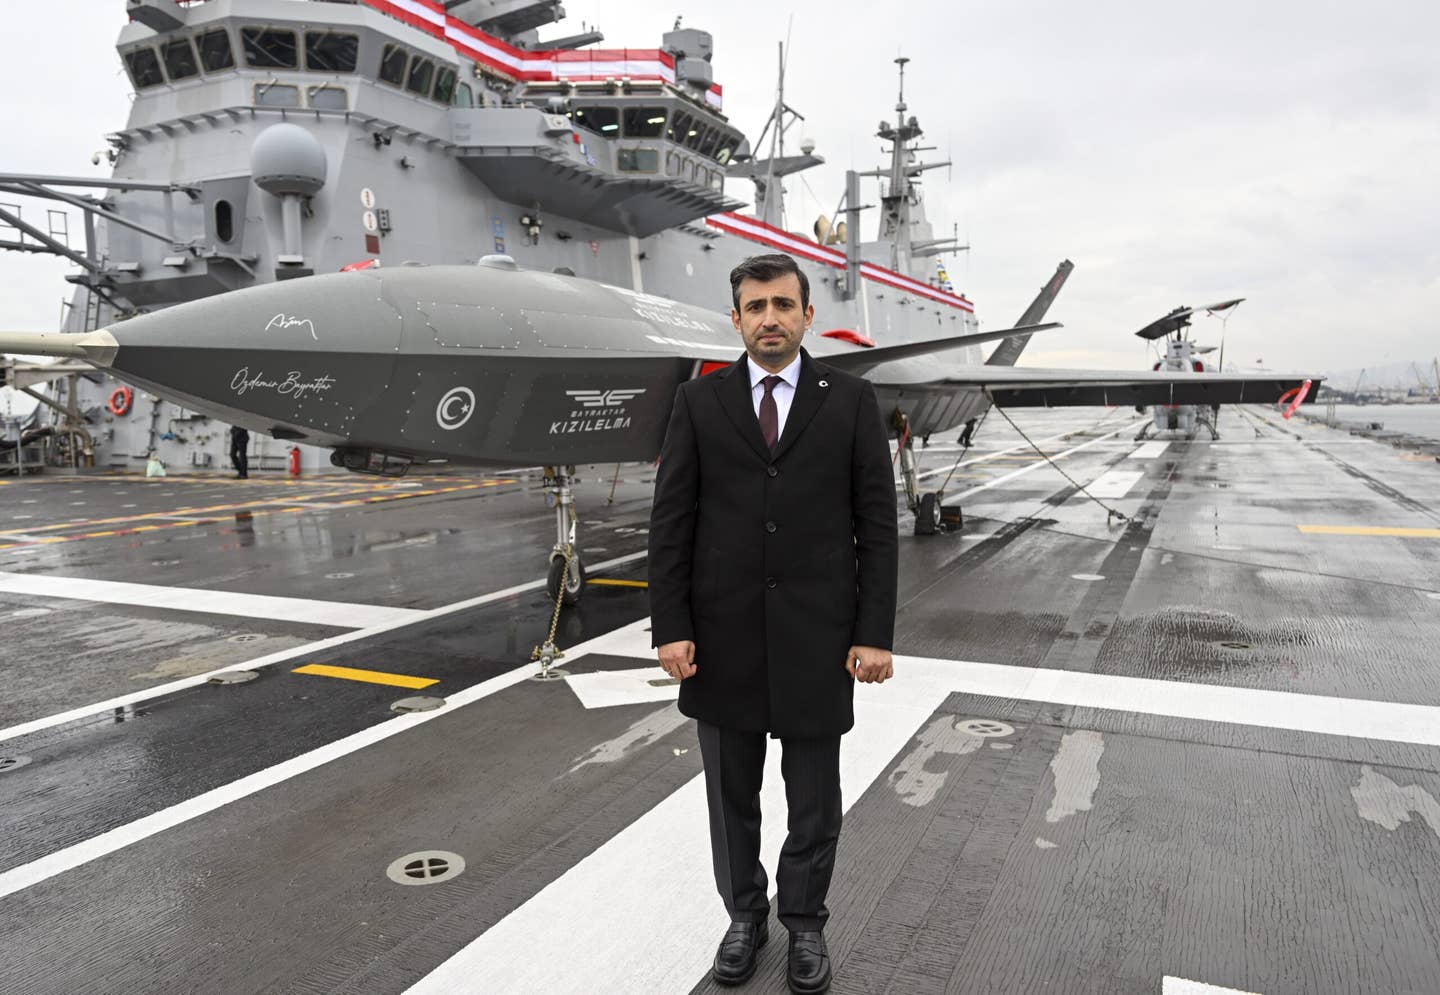 Chairman of the board and the chief technology officer of Baykar, Selcuk Bayraktar, poses for a photo in front of the Kizilelma on the deck of TCG <em>Anadolu</em>. <em>Credit: Photo by Serhat Cagdas/Anadolu Agency via Getty Images</em>